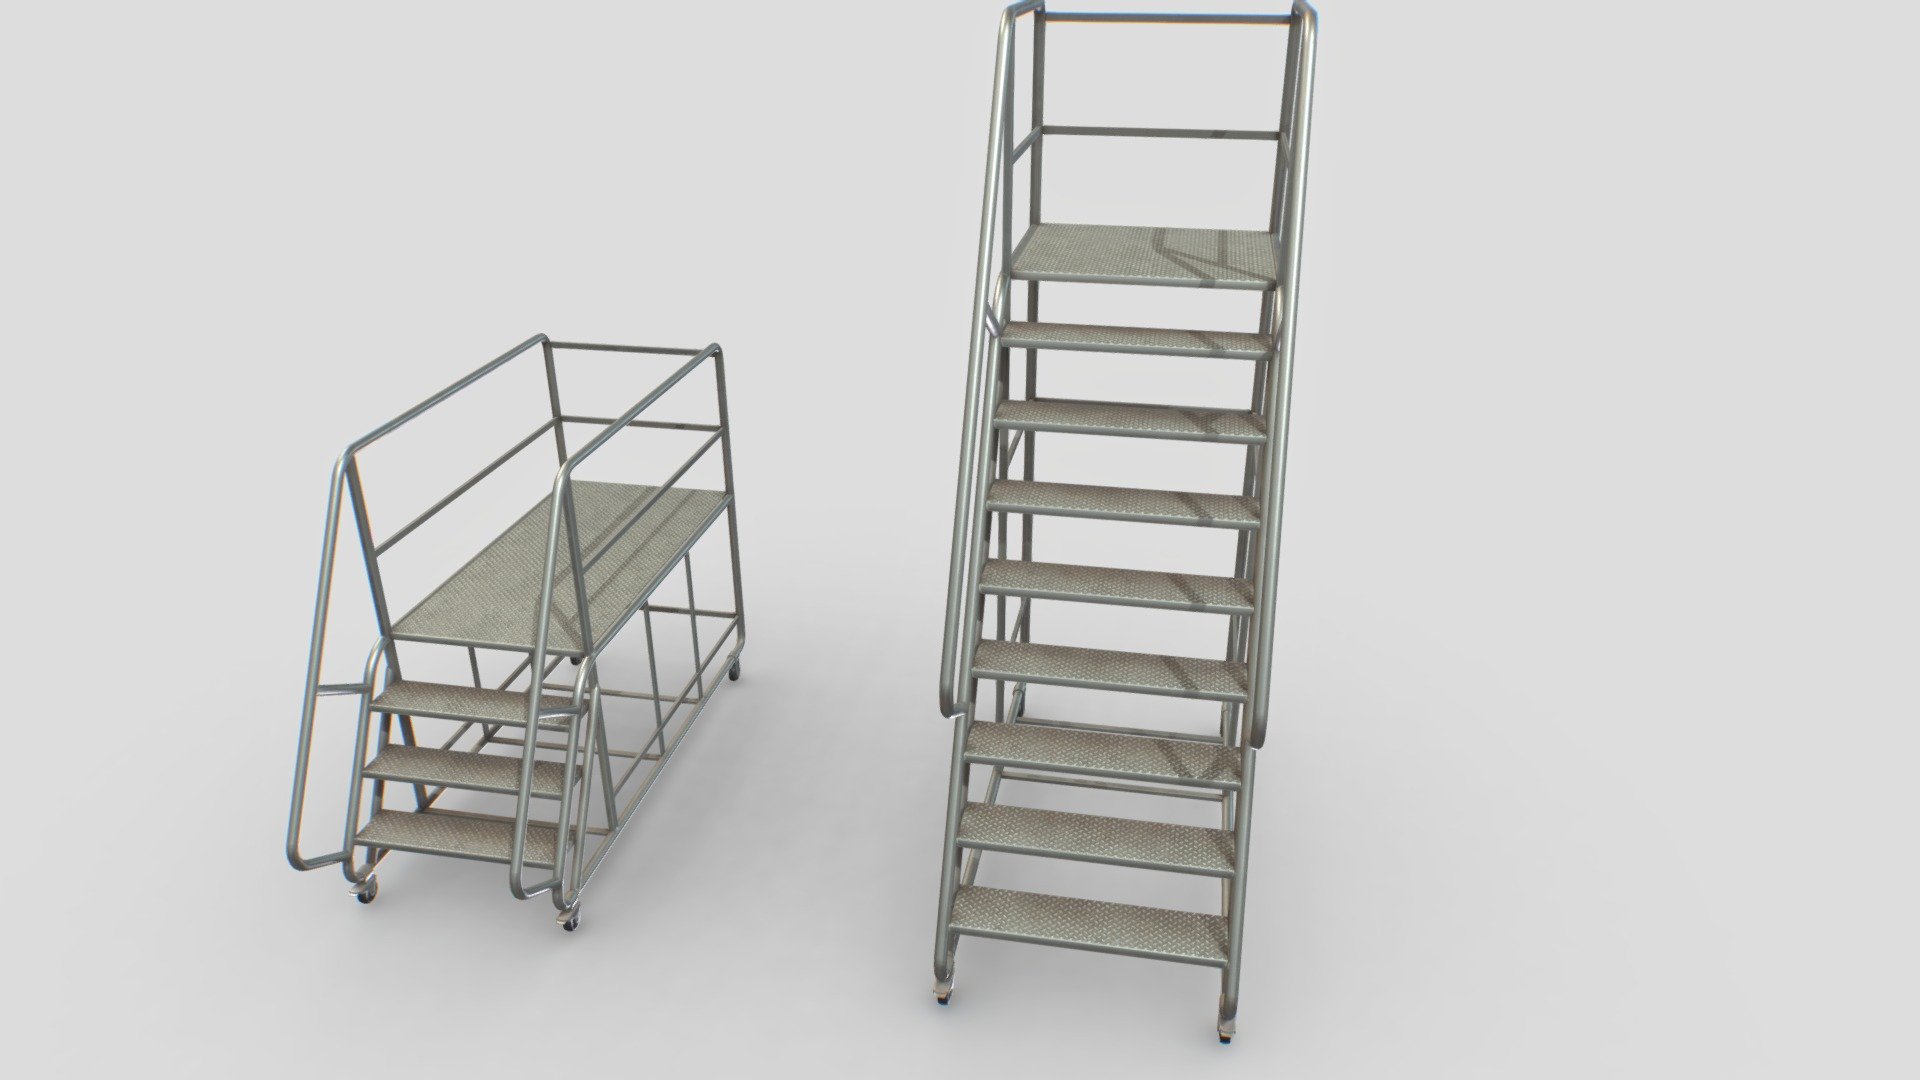 Industrial mobile stair based in real one. Real scale. Comes with 4096x PBR textures including Albedo, Normal, Metalness, Smoothness, Roughness and AO.

Model comes as a full object (static) and in parts so you can move it (wheels).

Total polys 11000. 5000 verts - Industrial Warehouse Stair - Buy Royalty Free 3D model by 32cm 3d model